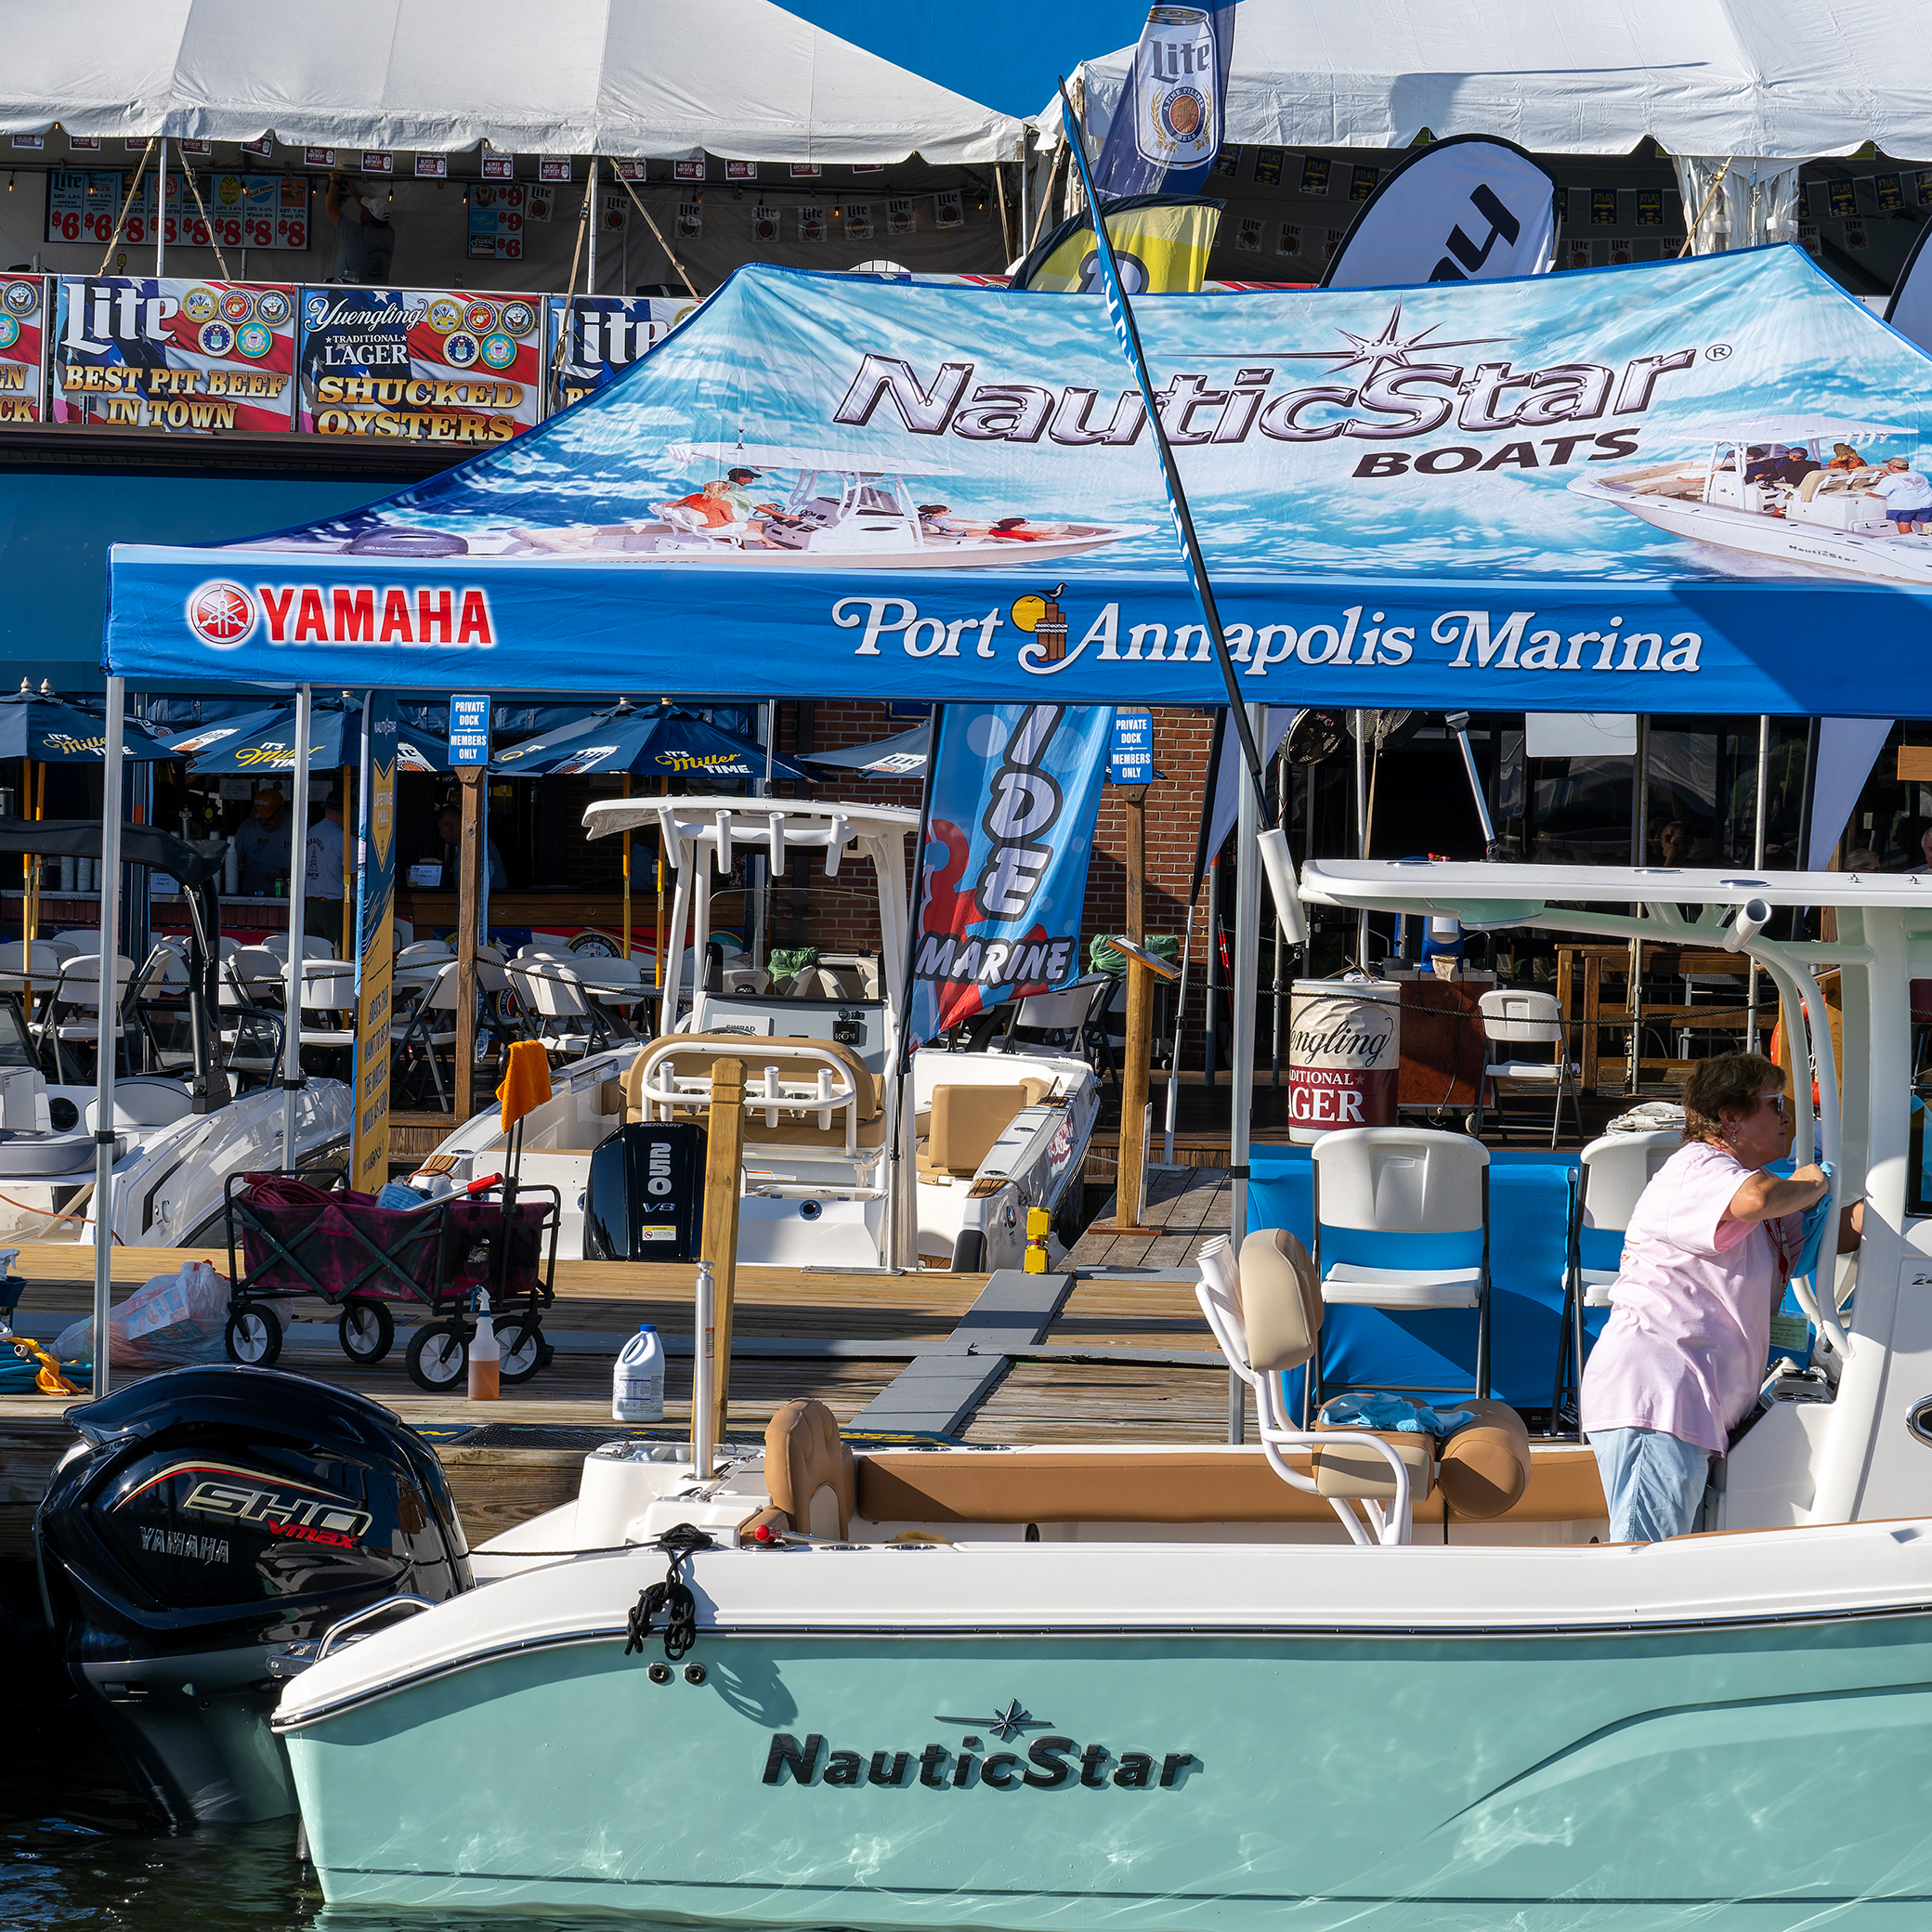 Annapolis Powerboat Show